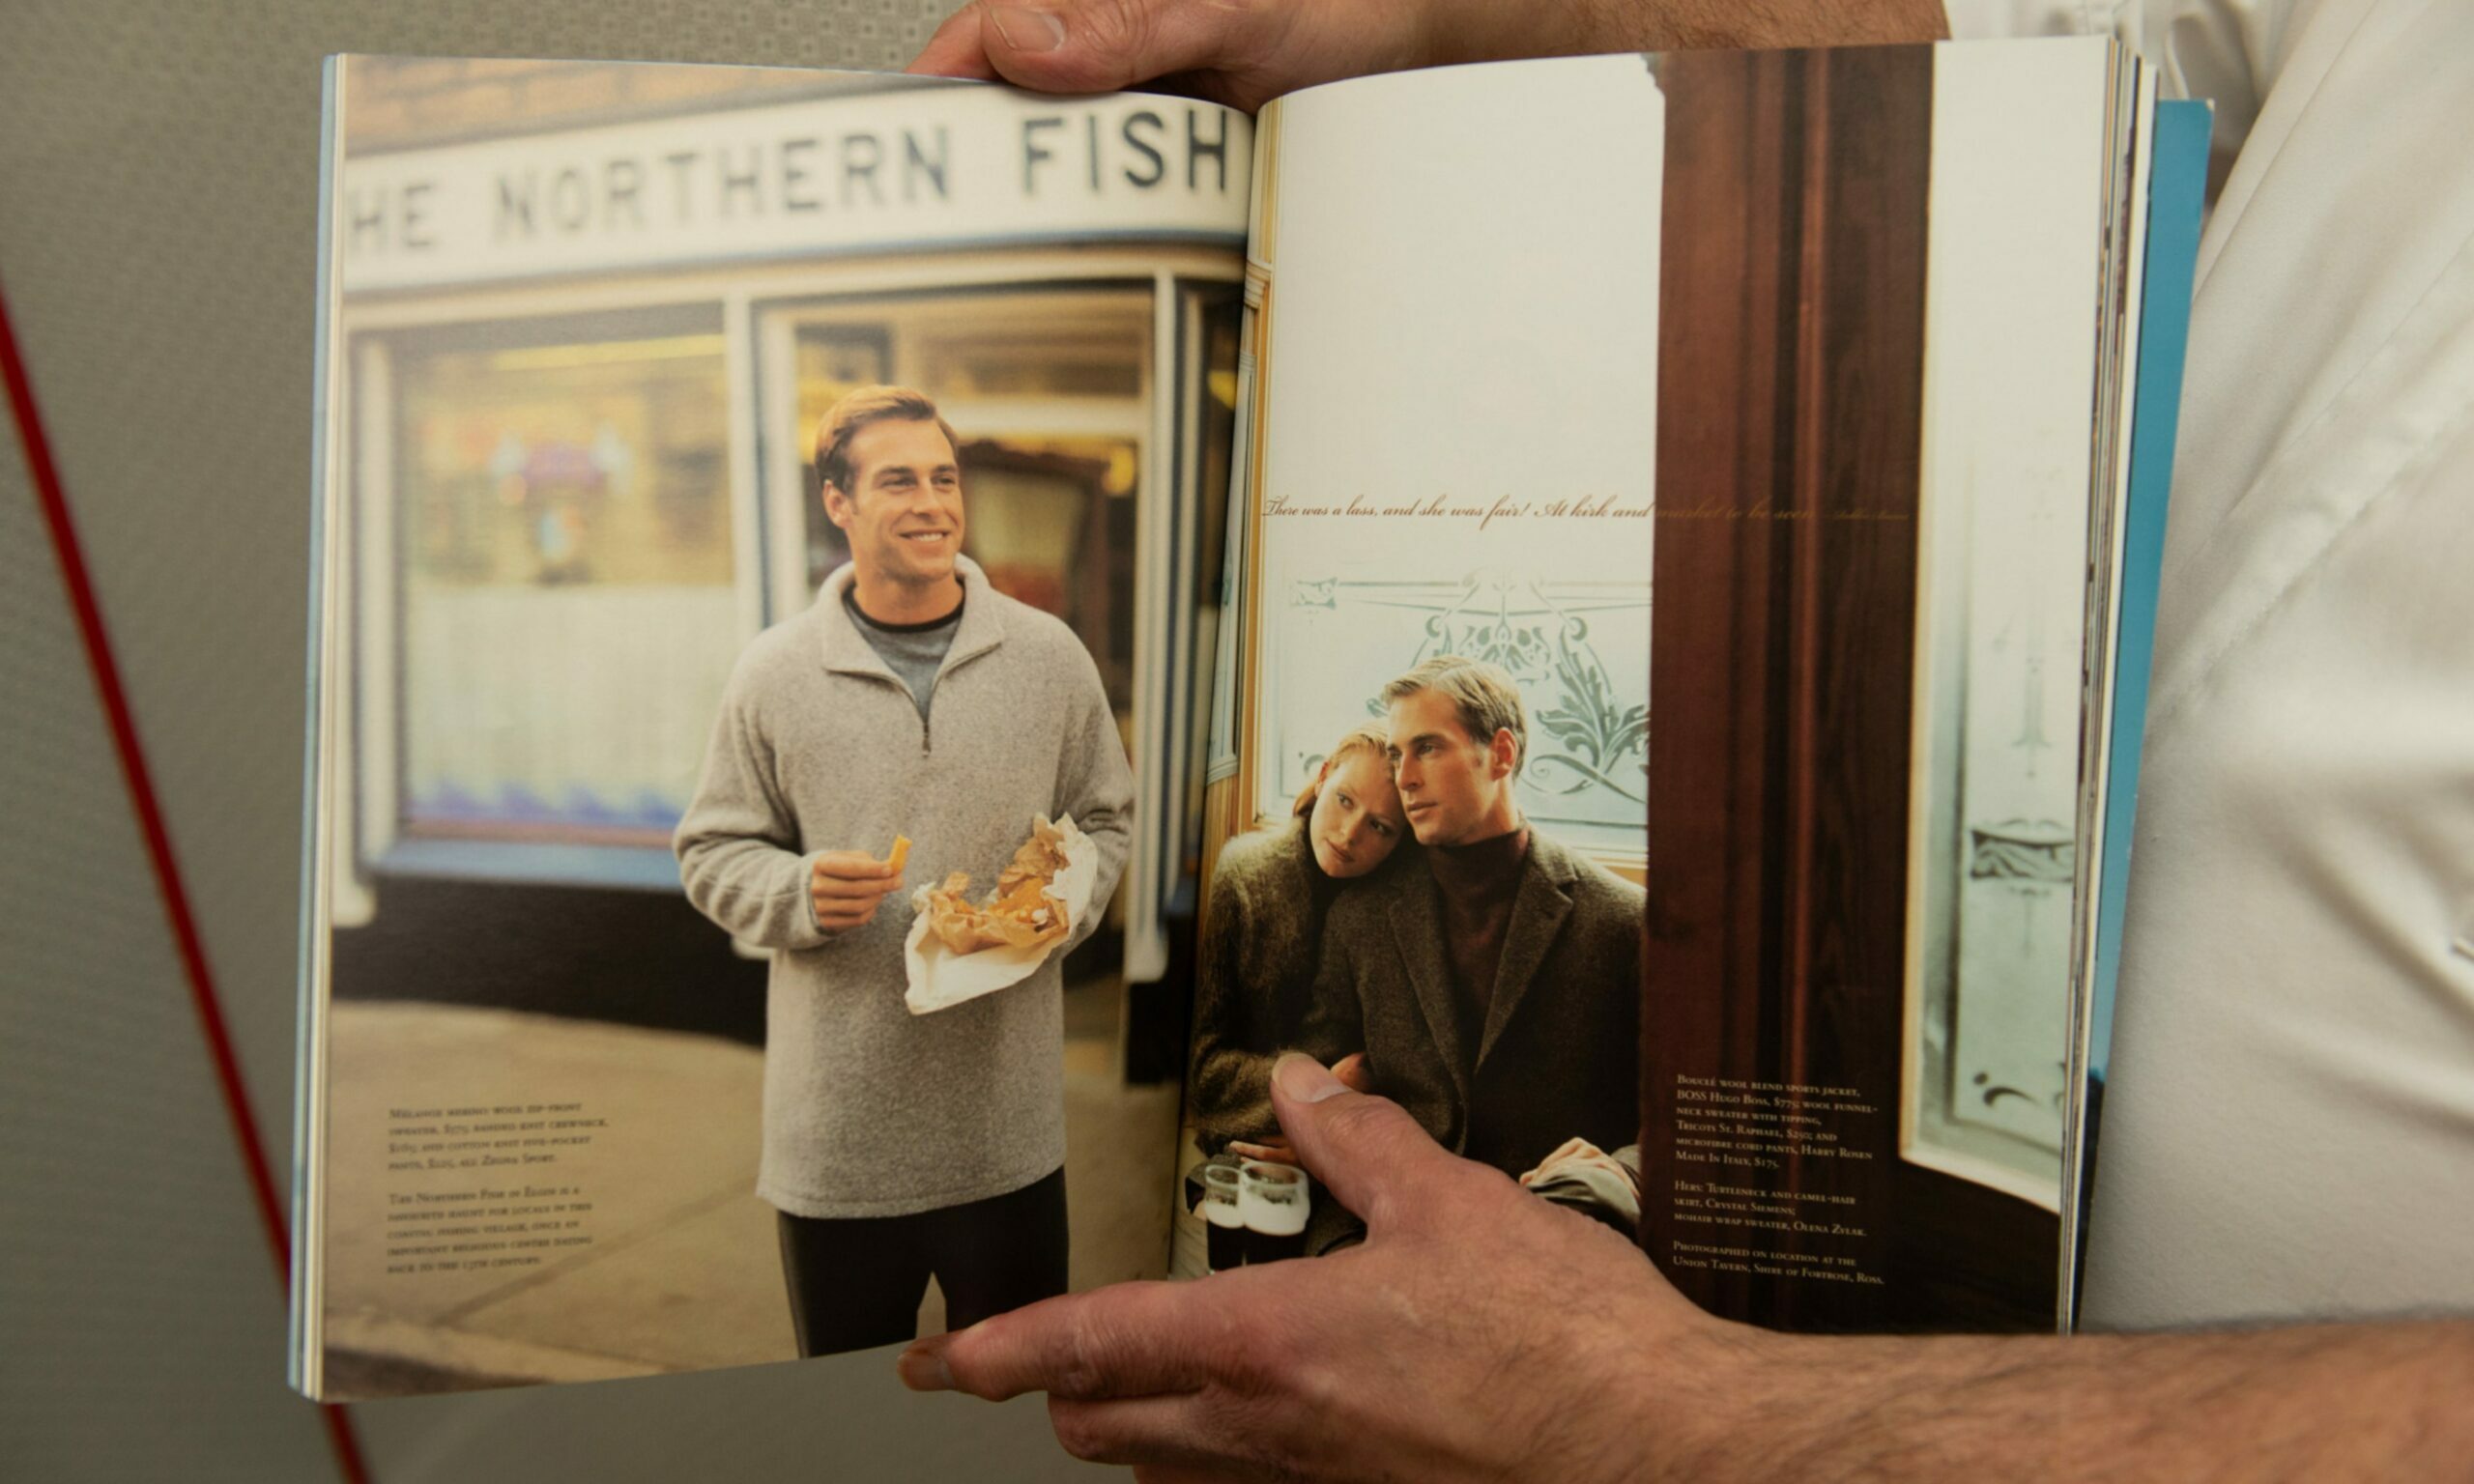 Michael Miele holding up a magazine showing a man eating chips smiling outside Northern Fish Restaurant. 